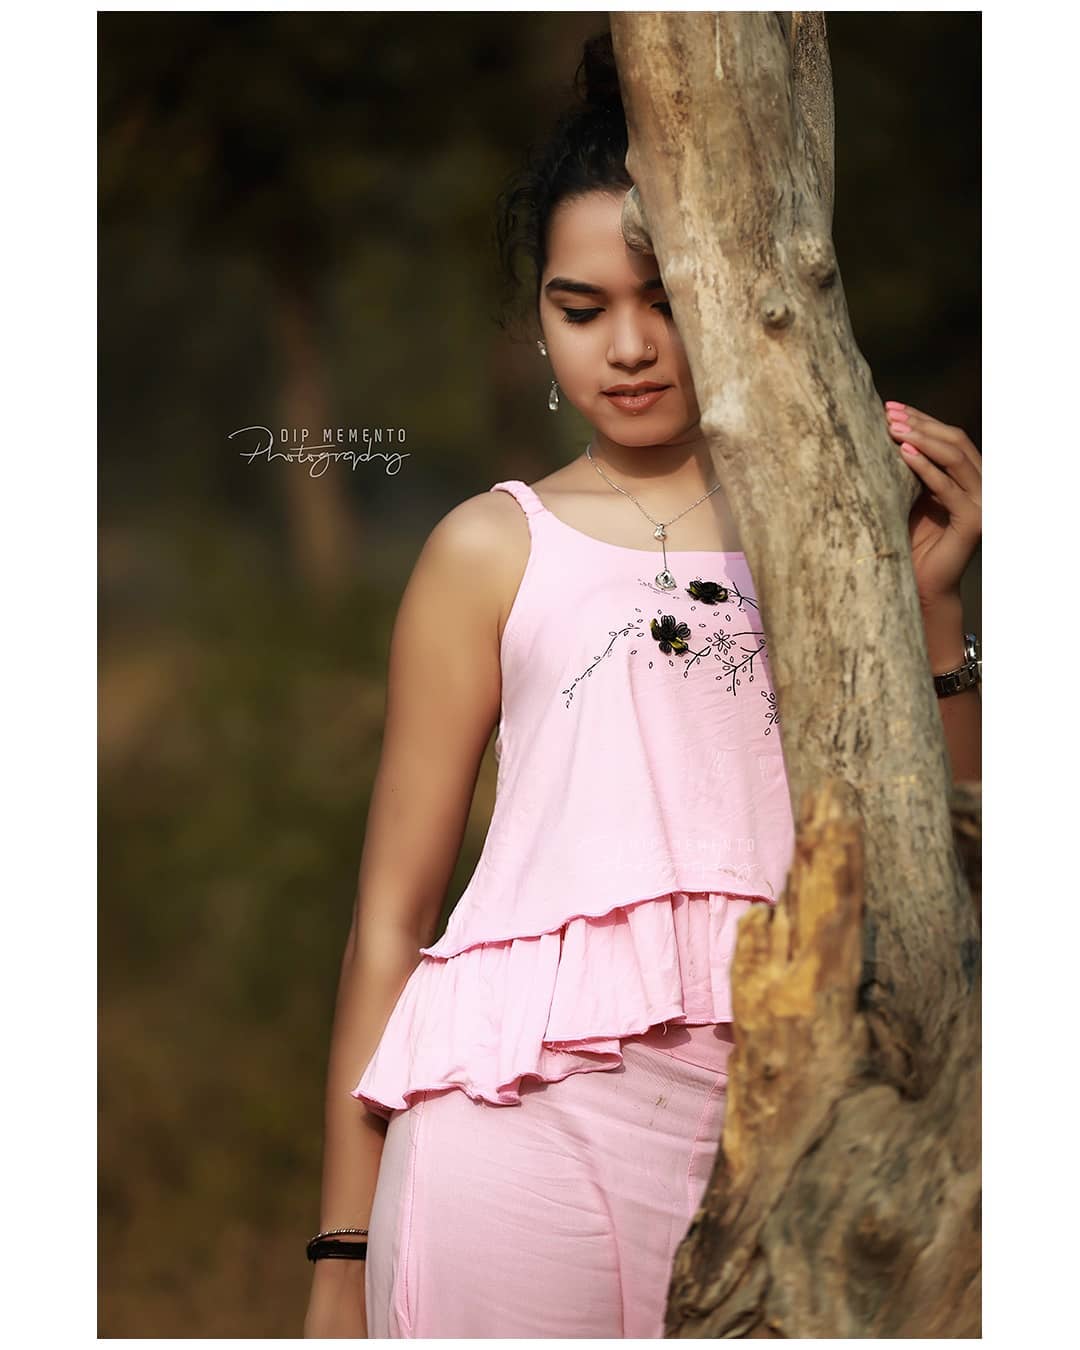 Portfolio shoot..
.
In frame - Payal
© @dip_memento_photography
.
Shoot With Canon 5d Mark iv + #Godox Hss
@canonindia_official
.
.
.
#indianportrait
#_coi #_eoi #oph #_woi
#dipmementophotography #bbc
#ahmedabadphotographer #shwetamalhotra03 # #ahmedabad
#storiesofindia #streetphotography #dipthakkar
#yourshot_india
#photographers_of_india
#mypixeldiary
#tripotocommunity
#natgeoindia
#natgeoyourshot
#dslrofficial #indianphotography #indiapictures
 #blogphotography

@natgeoindia @historytv18 @history @official_photographers_hub @earthpix @earthofficial
@photographers.of.india @photographers_of_india
@dslrofficial @india.pictures @depths_of_world @depthobsessed @visualsofjulius @bbcearth @goodearthindia @earth @discovery @discoverychannelin @lonelyplanetindia @lonelyplanet @lightroom